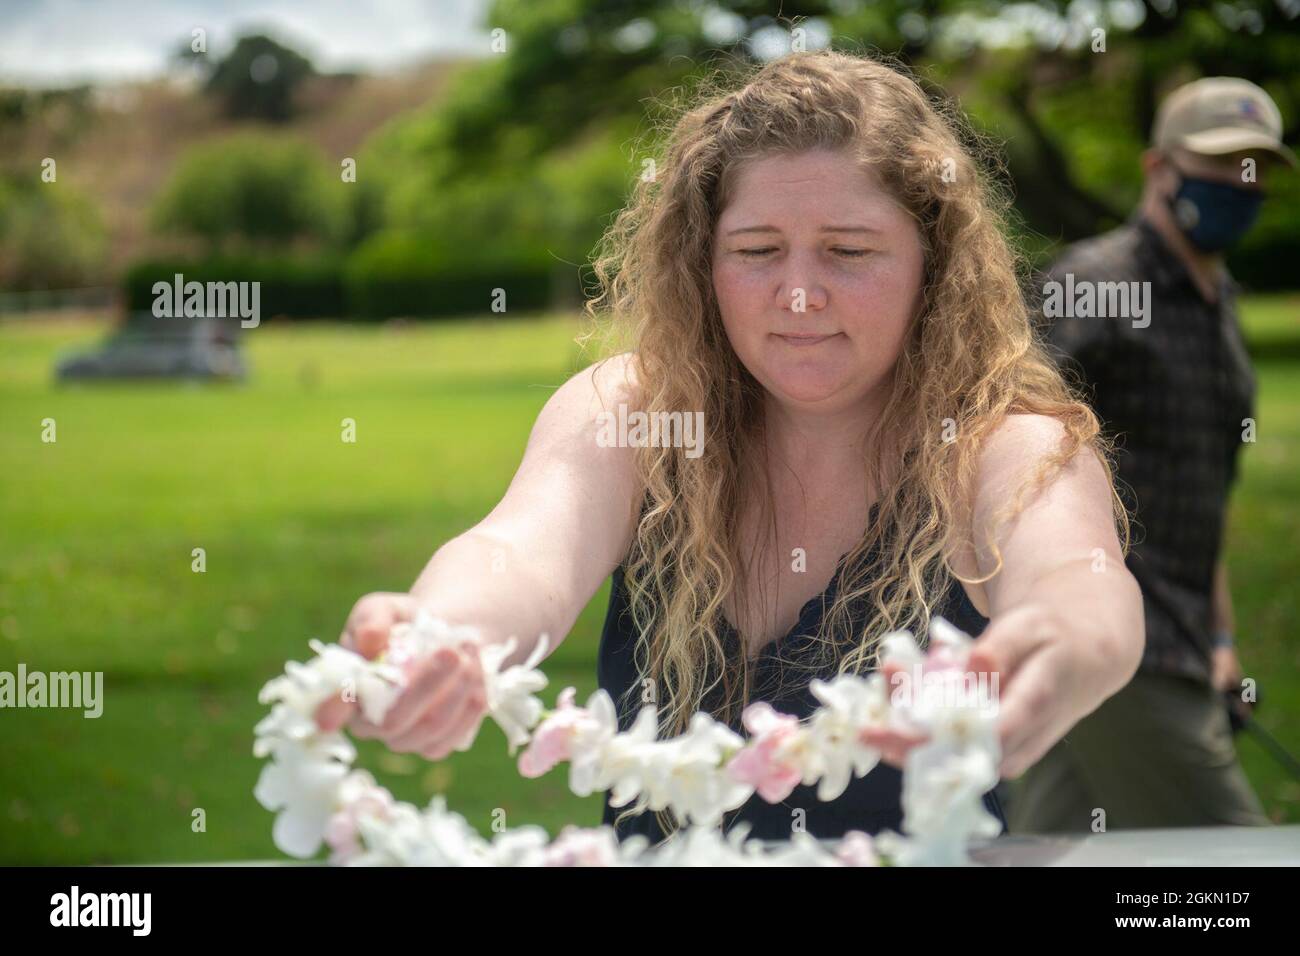 Sarah Adams, great-grandniece of U.S. Navy Gunner’s Mate 3rd Class Shelby Treadway, 25, of Manchester, Kentucky, places a wreath on her granduncle's casket during the funeral at the National Memorial Cemetery of the Pacific, Honolulu, Hawaii, June 2, 2021. Treadway was assigned to the USS Oklahoma, which sustained fire from Japanese aircraft and multiple torpedo hits causing the ship to capsize and resulted in the deaths of more than 400 crew members on Dec. 7, 1941, at Ford Island, Pearl Harbor. Treadway was recently identified through DNA analysis by the DPAA forensic laboratory and laid to Stock Photo